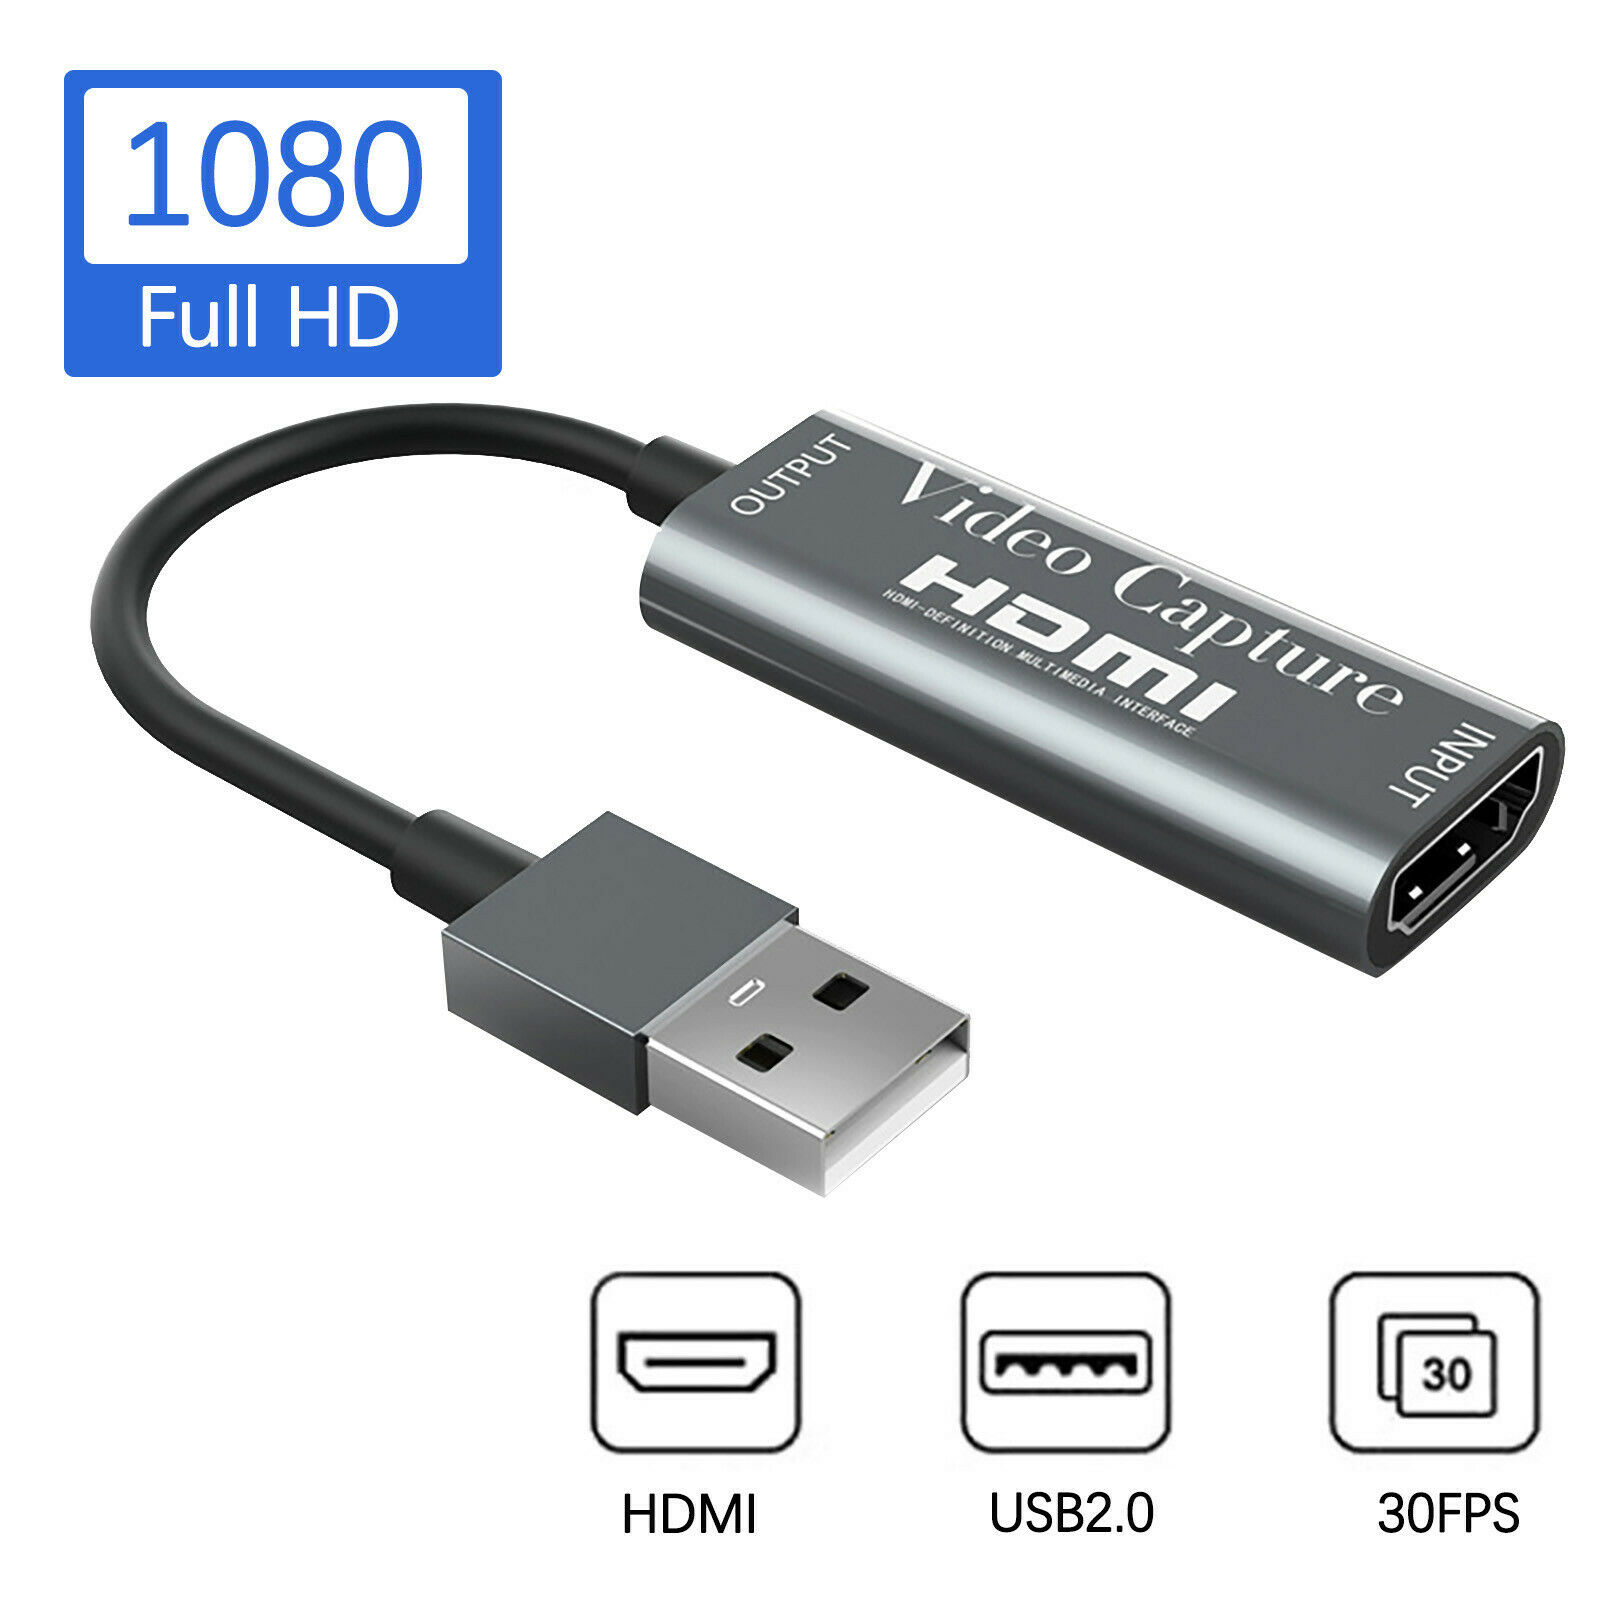 Hdmi To Usb 2.0 Video Capture Card 1080p Hd Recorder Game & Video Live Streaming